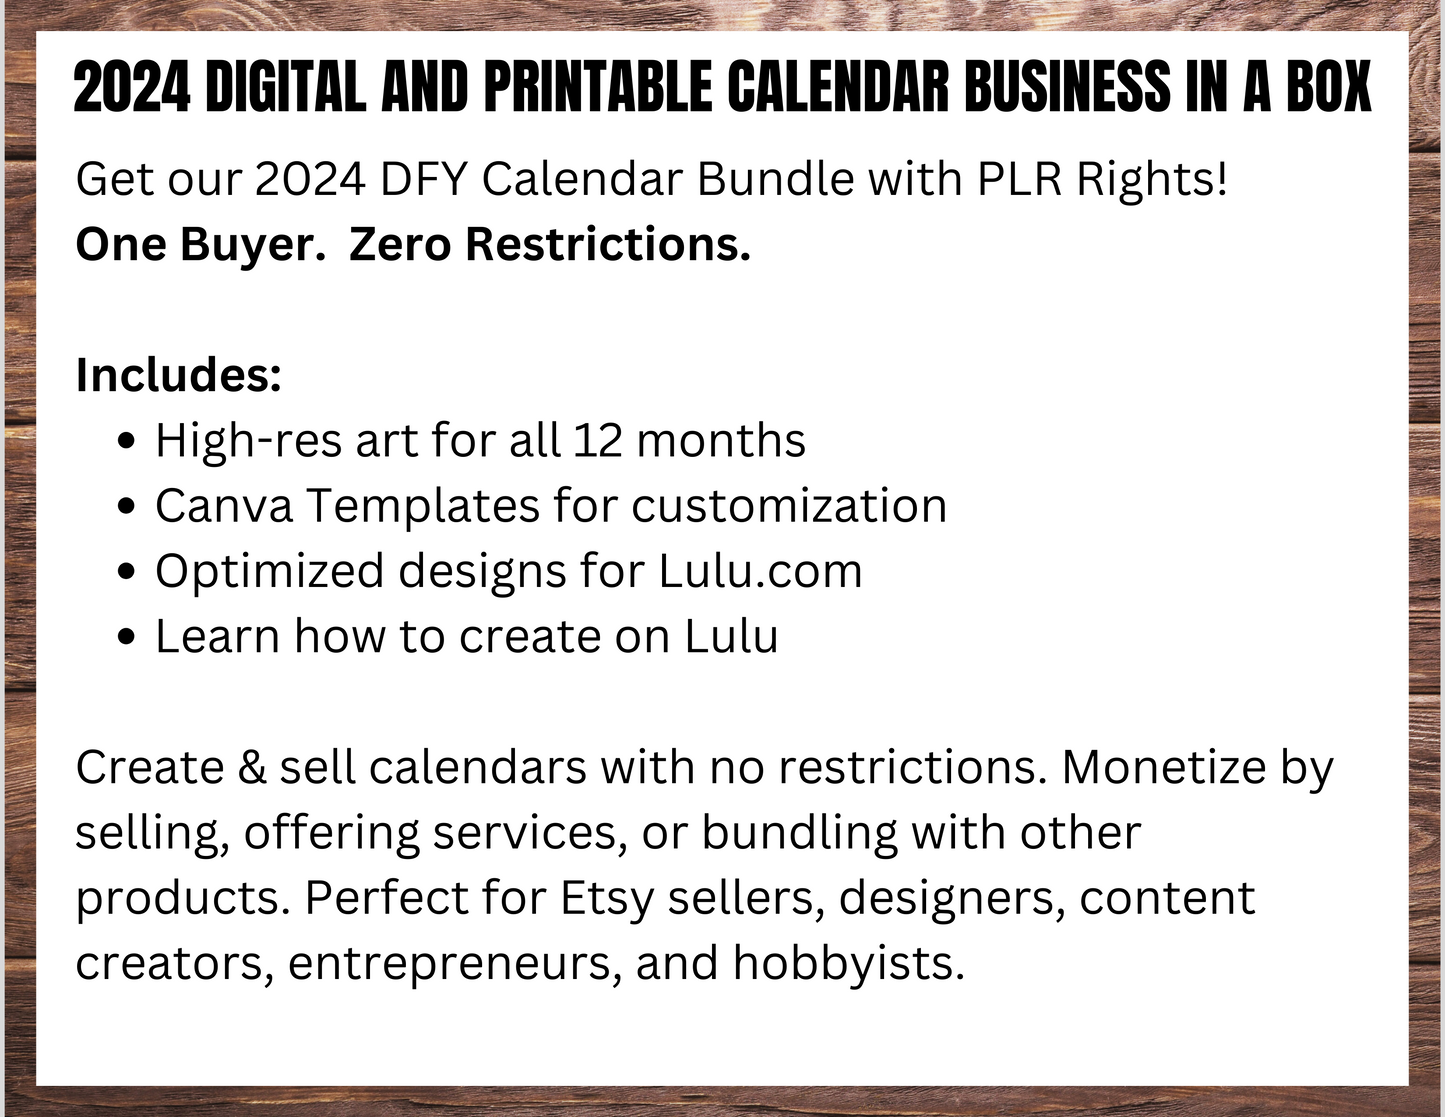 009-BKB | Create & Sell Your Own 2024 Calendars | DFY Designs & Templates